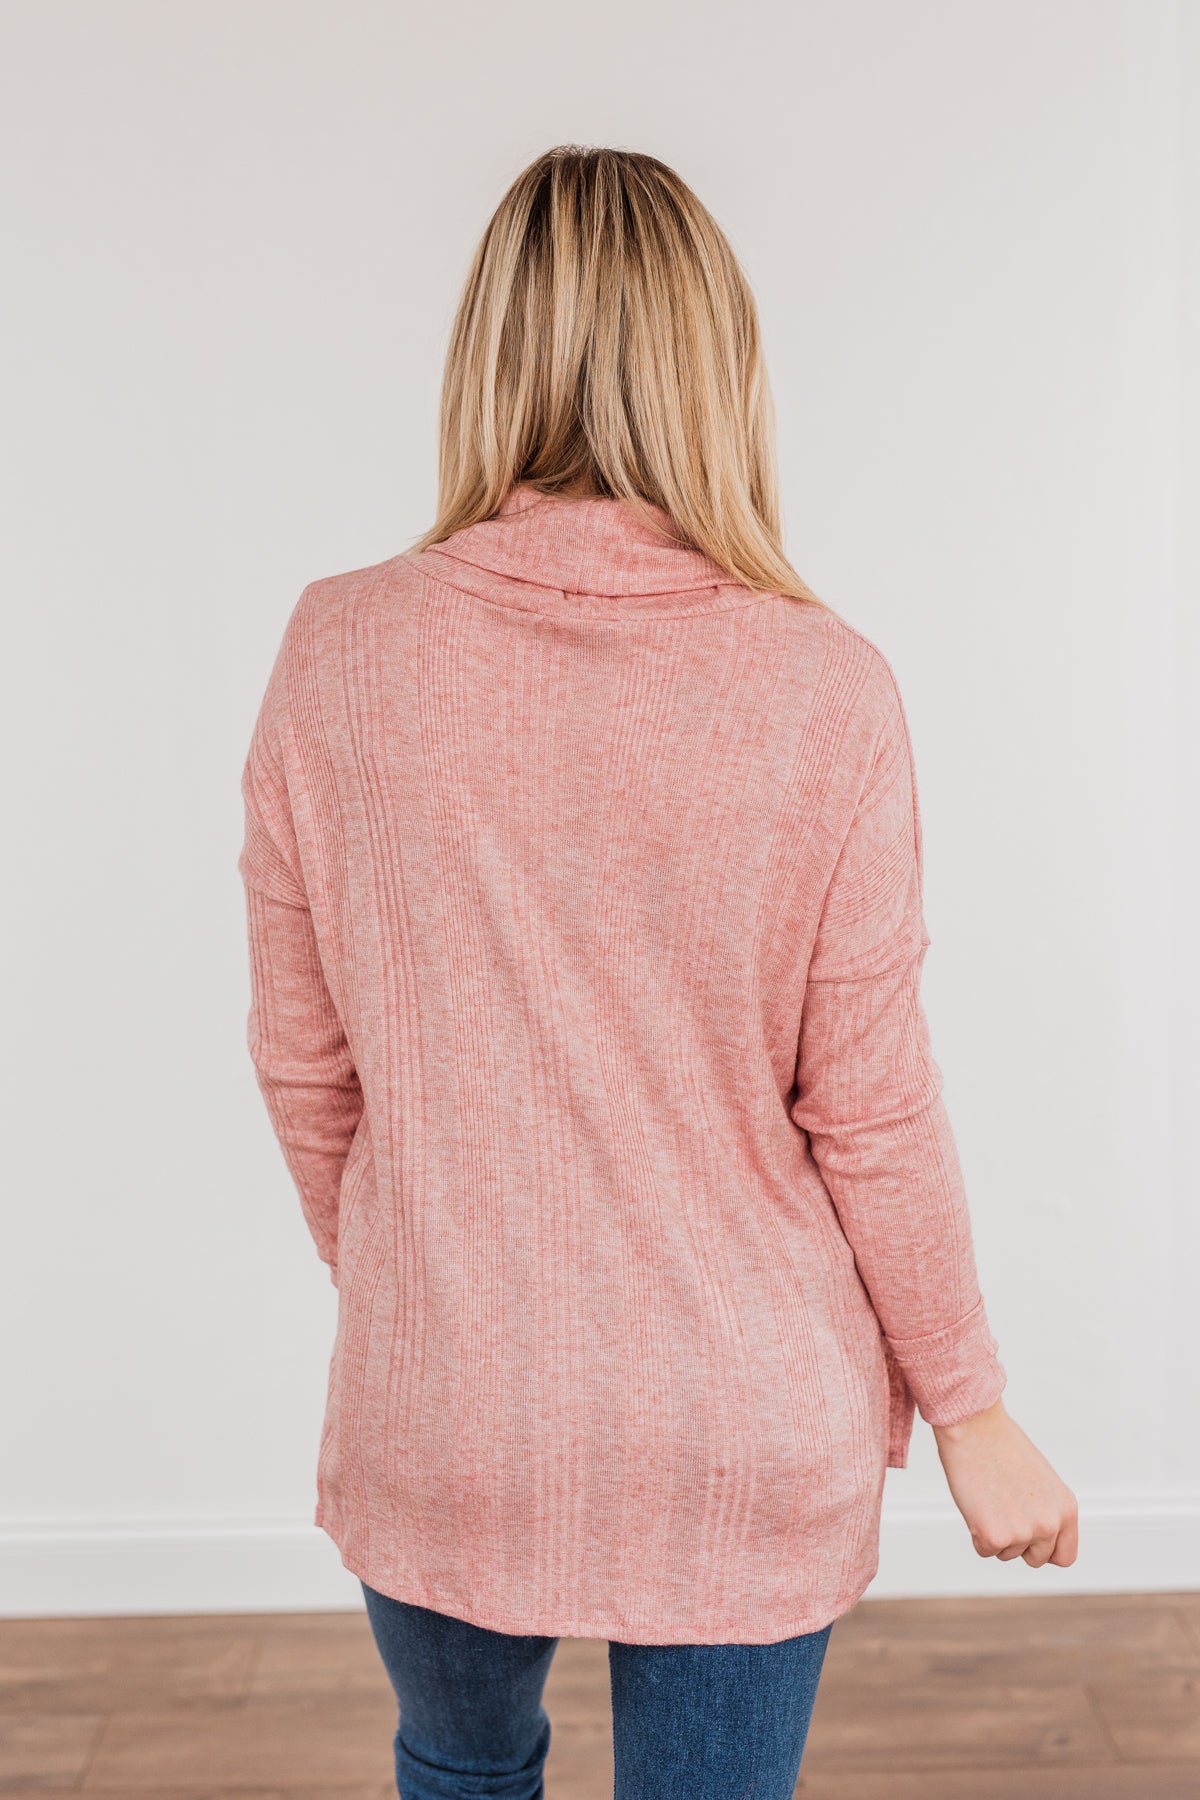 Make Life Count Cowl Neck Top- Pink